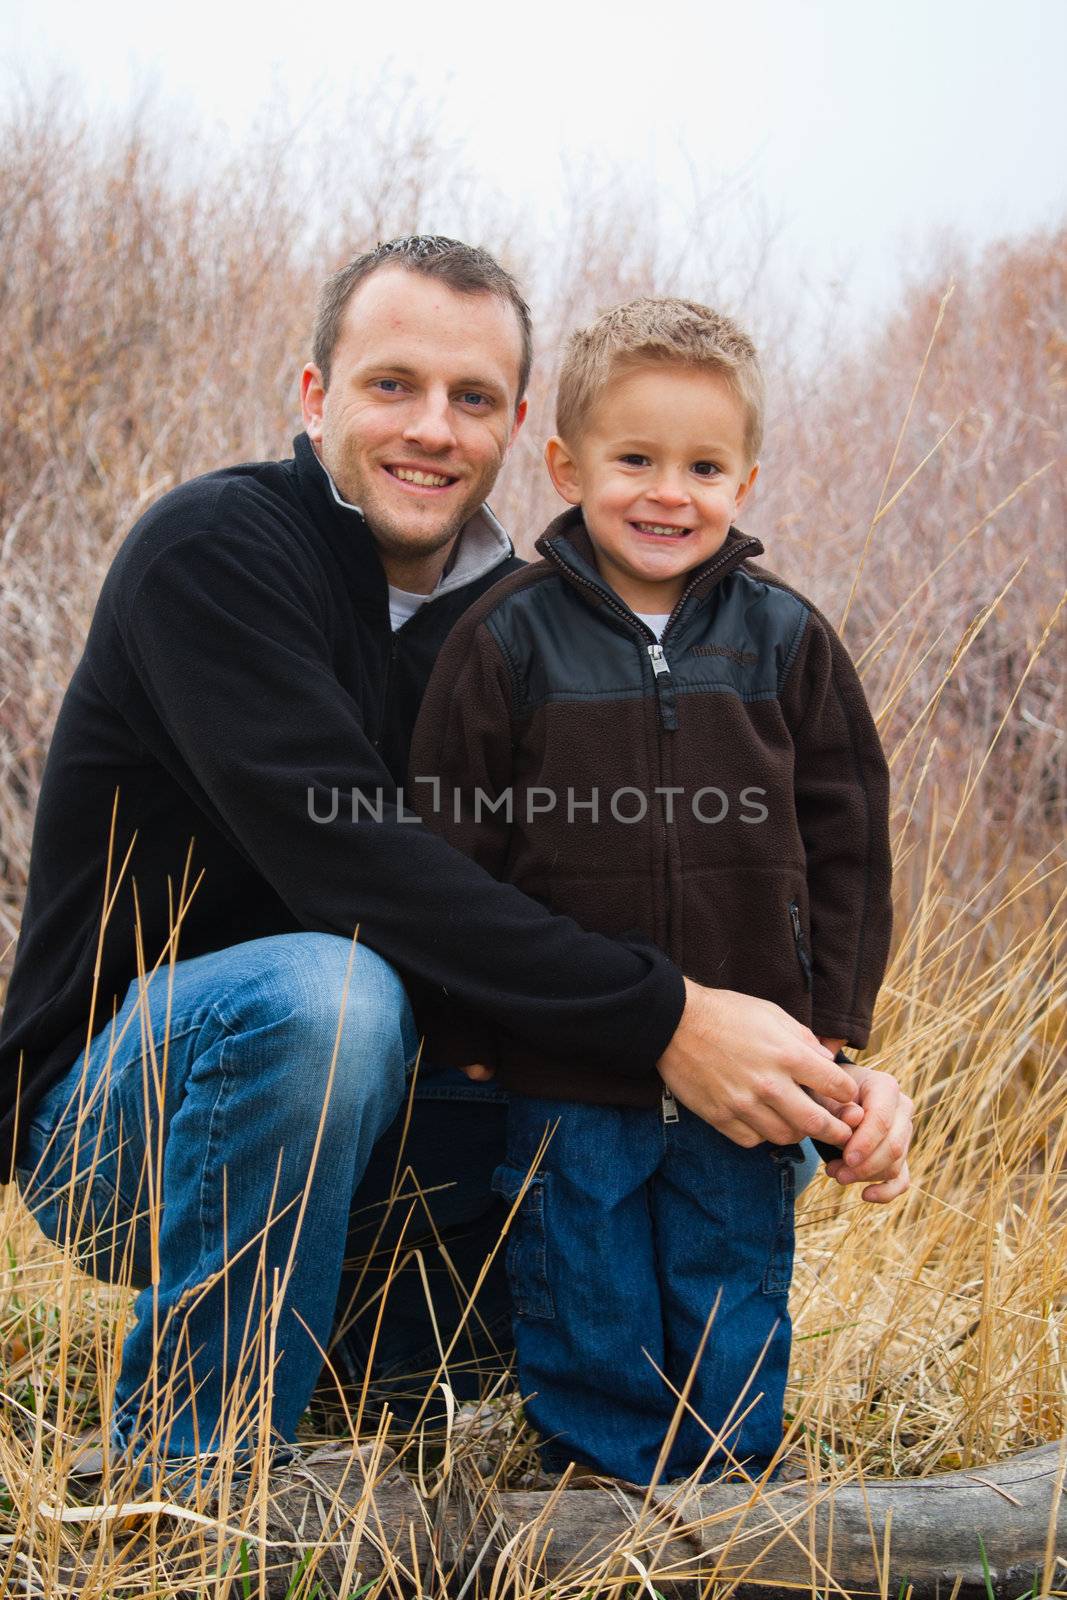 A father and son hanging out in Nature.  They may be camping, hiking or just exploring.